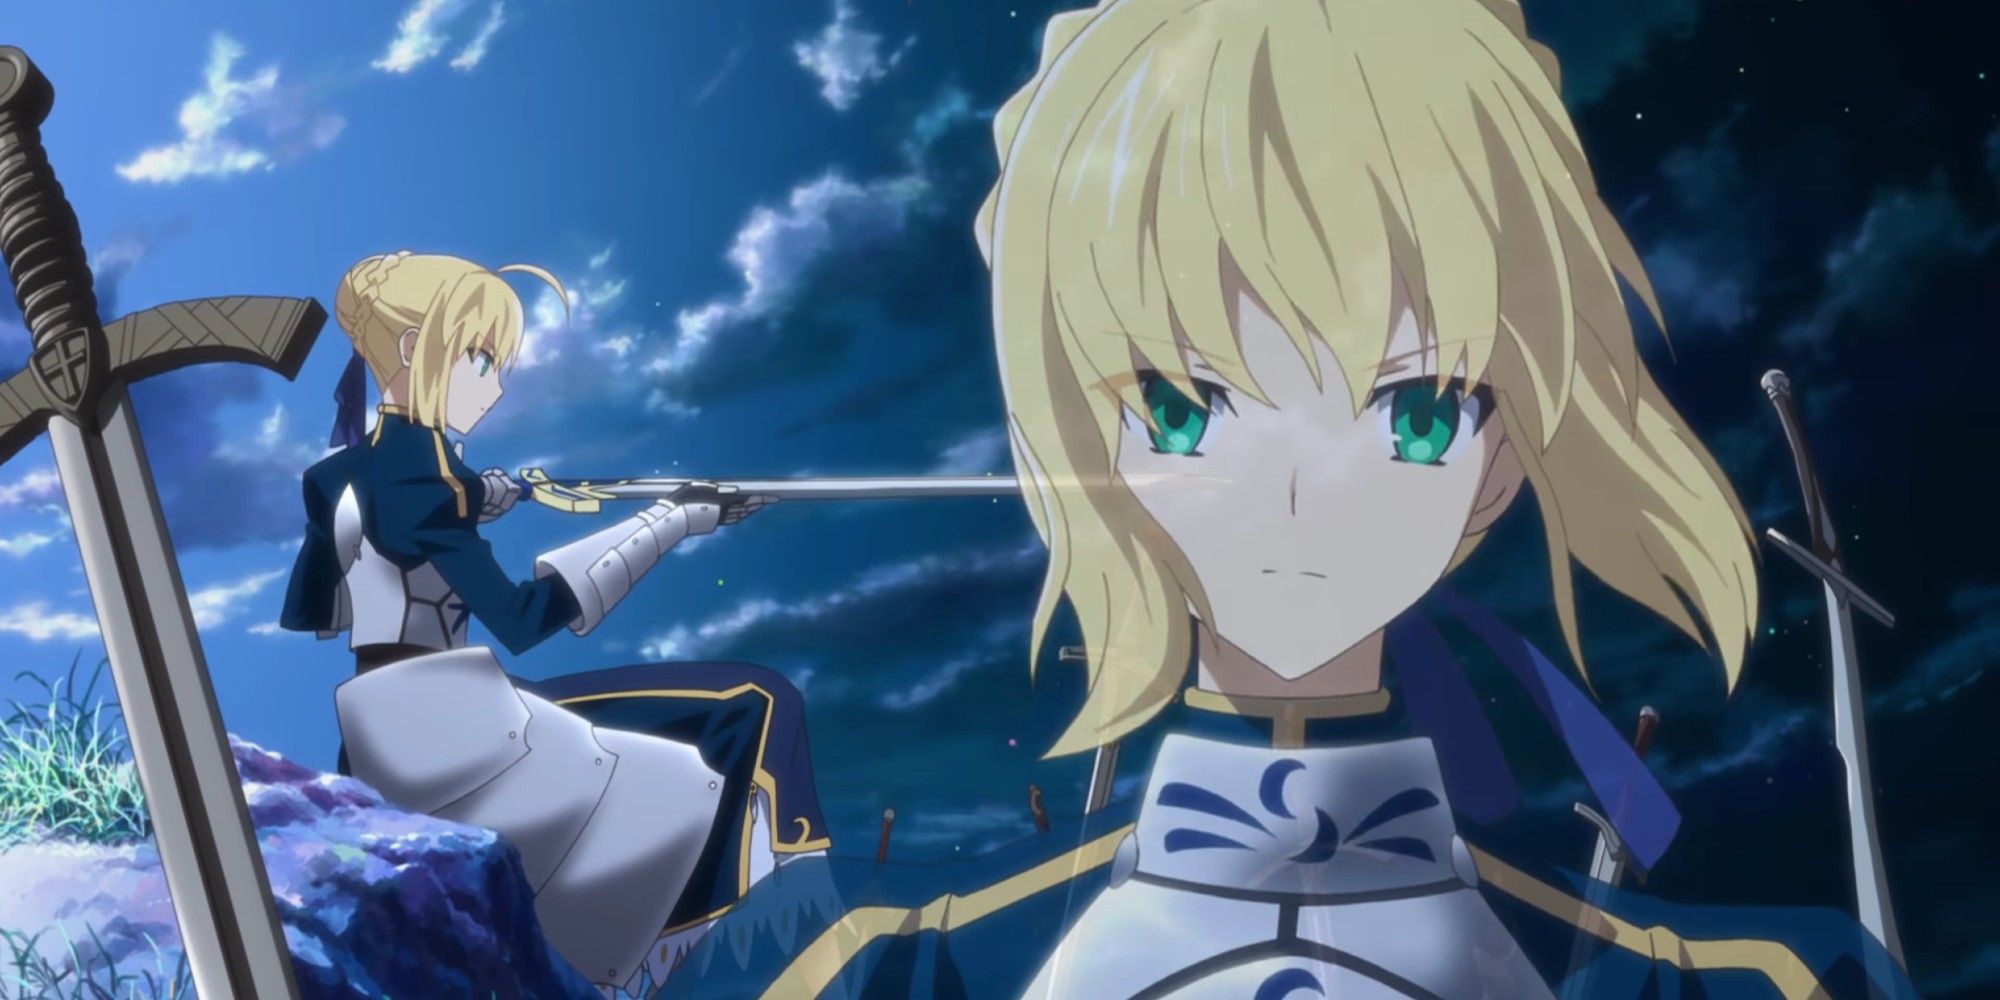 The Servant known as Saber sits on a rock and examines her sword as a larger picture of her faces imposes on the screen